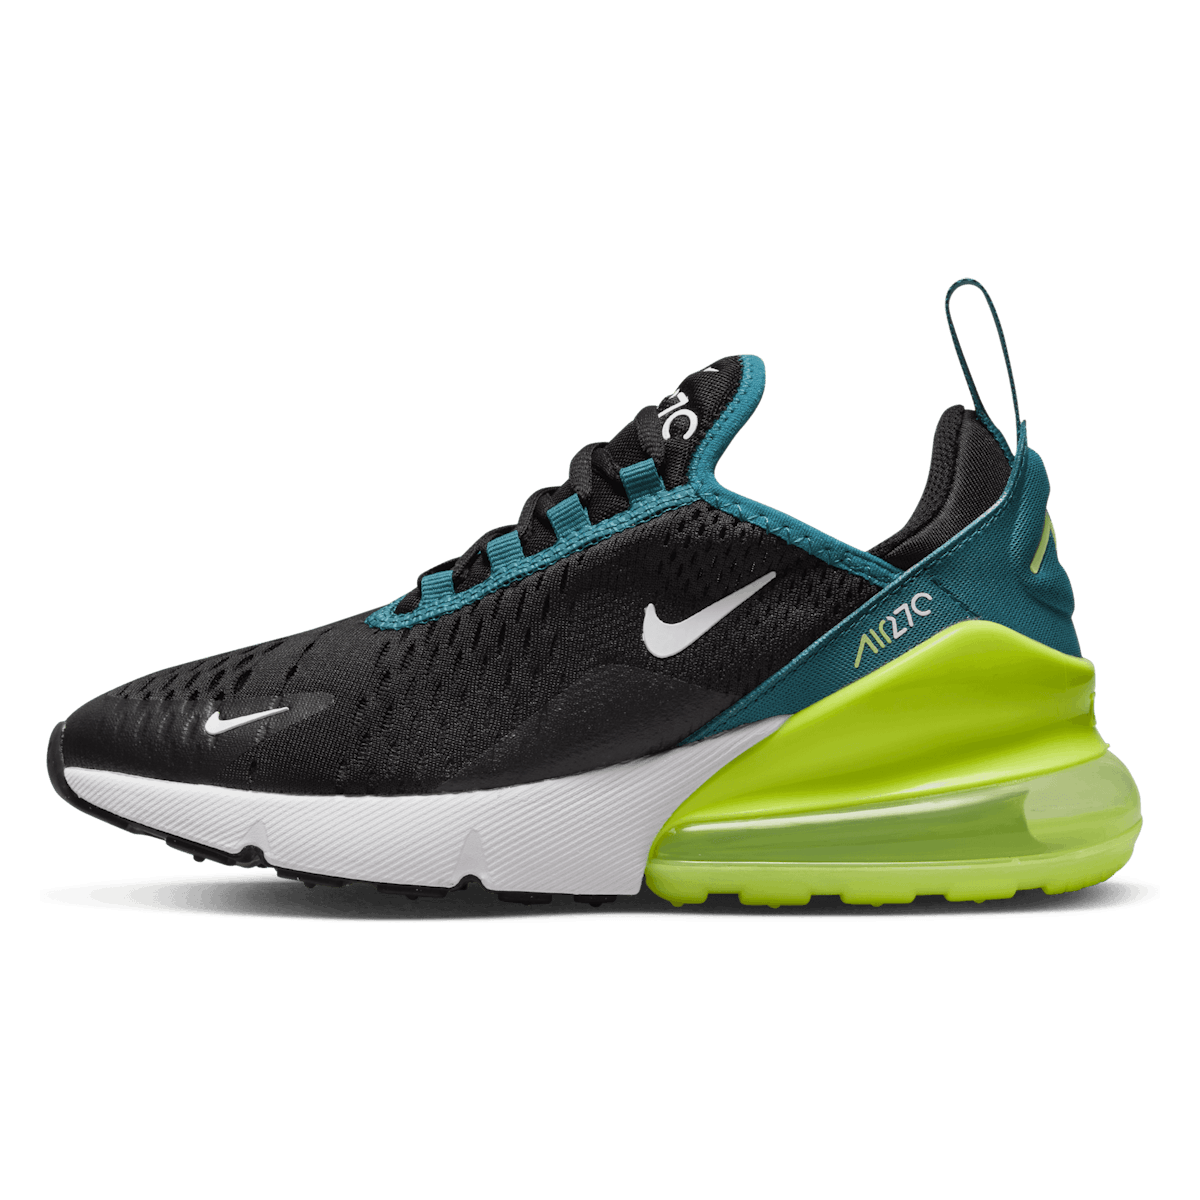 Nike Air Max 270 Black Bright Spruce Barely Volt (GS)